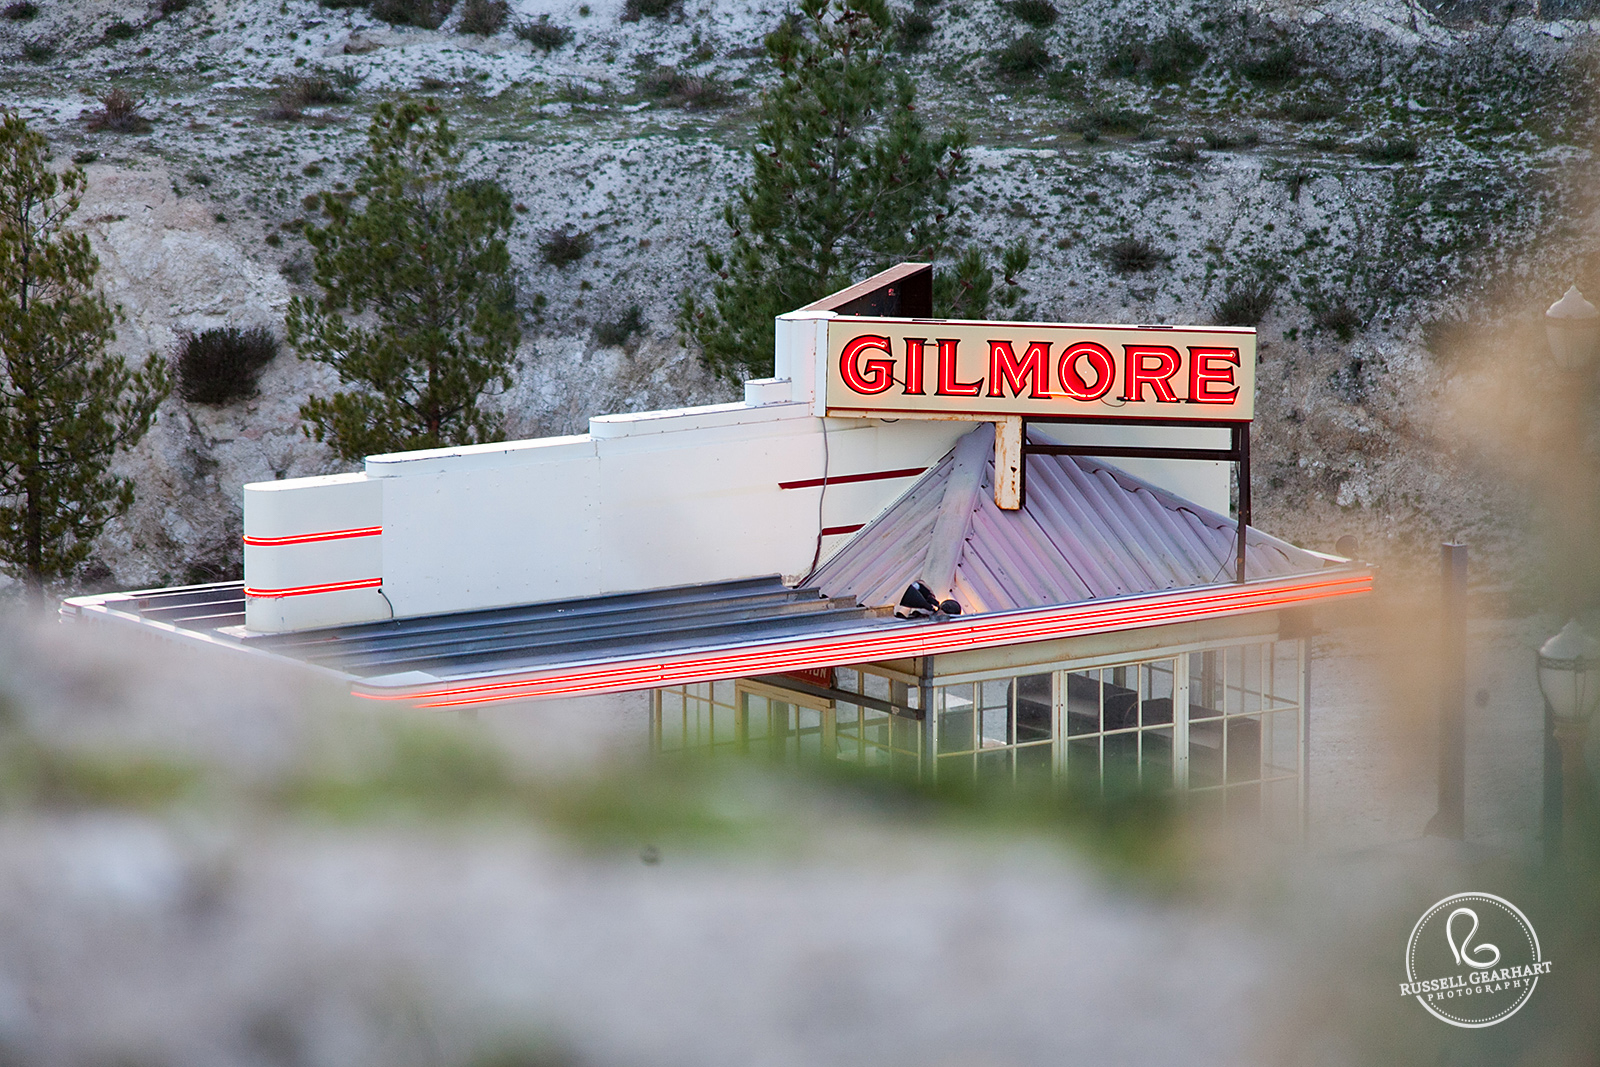 Gilmore Gas Station Neon Sign – Acton Wedding Venue – Russell Gearhart Photography – www.gearhartphoto.com